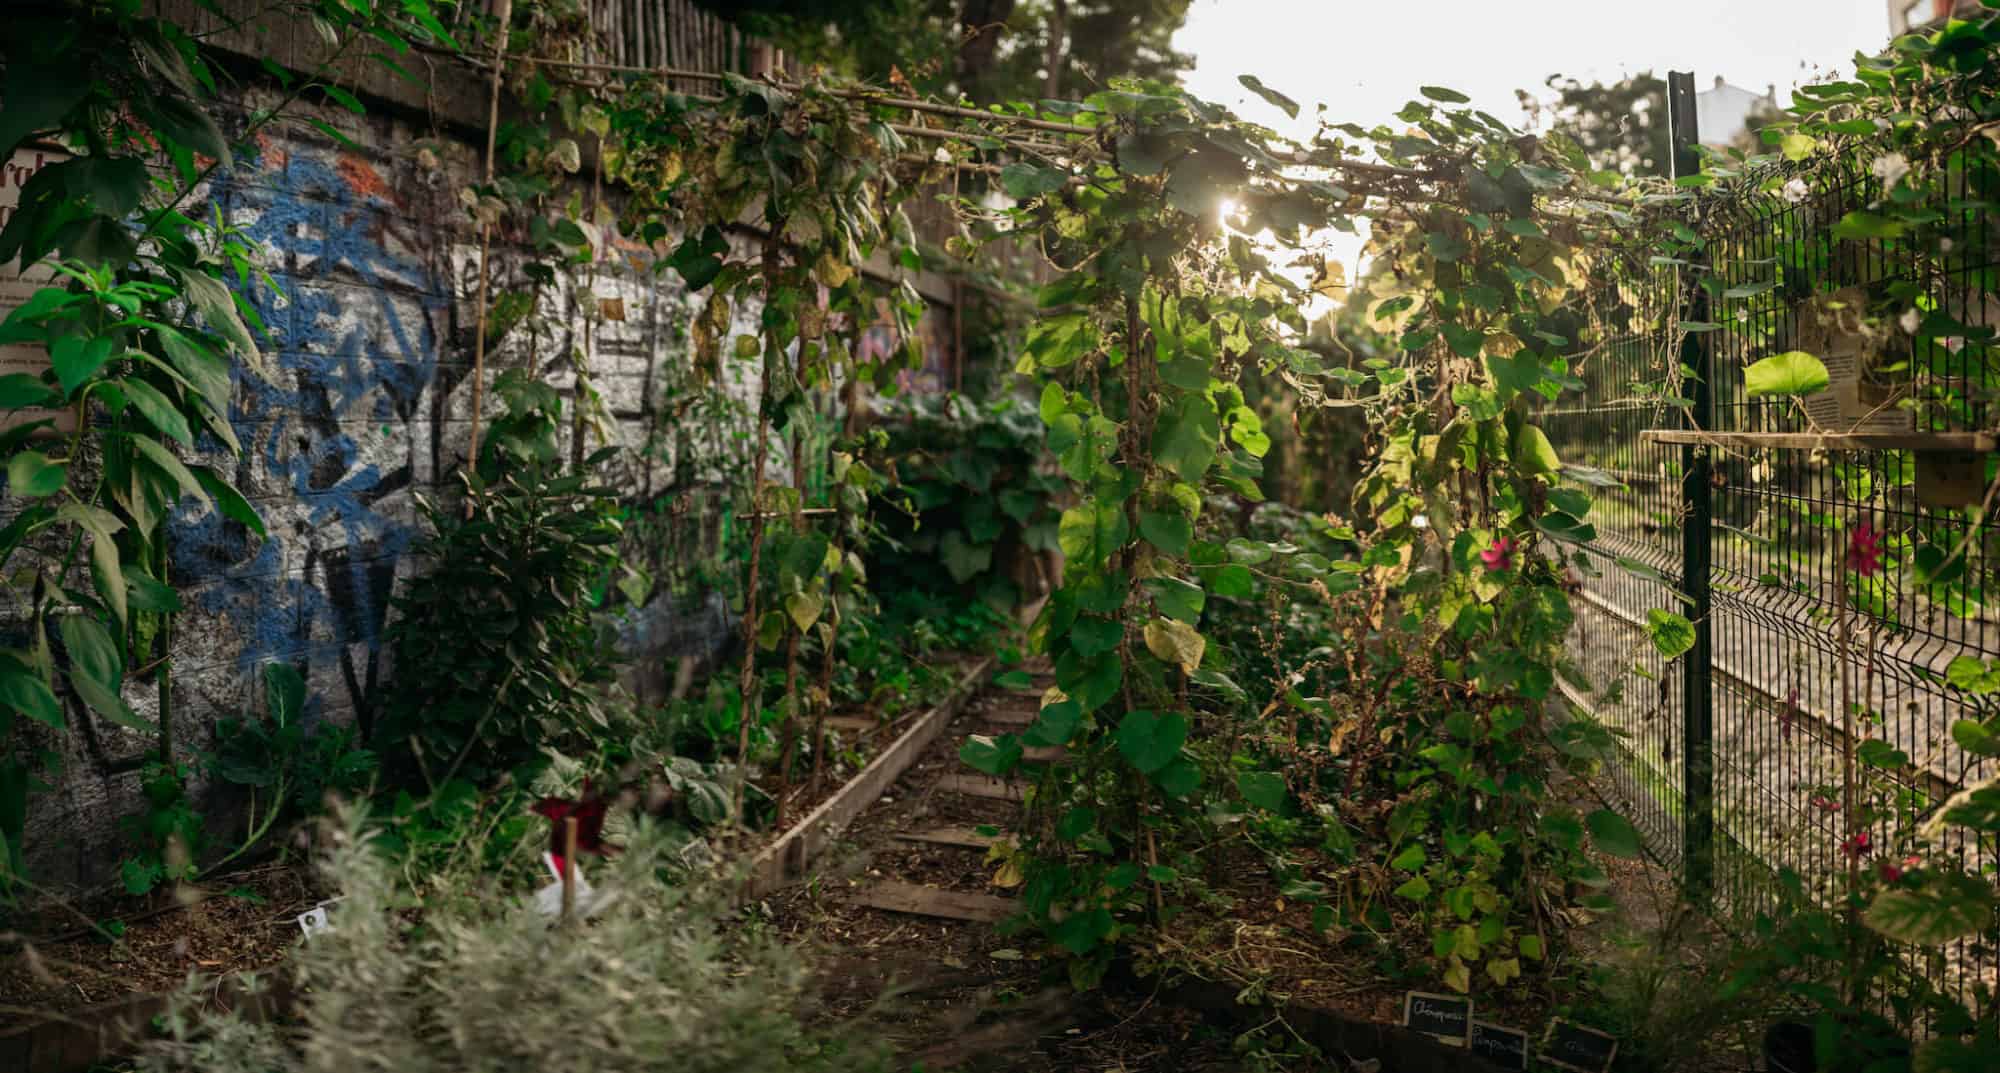 At La REcyclerie, a community space and restaurant in northern Paris, a garden grows along the old Petite Ceinture railway tracks. 